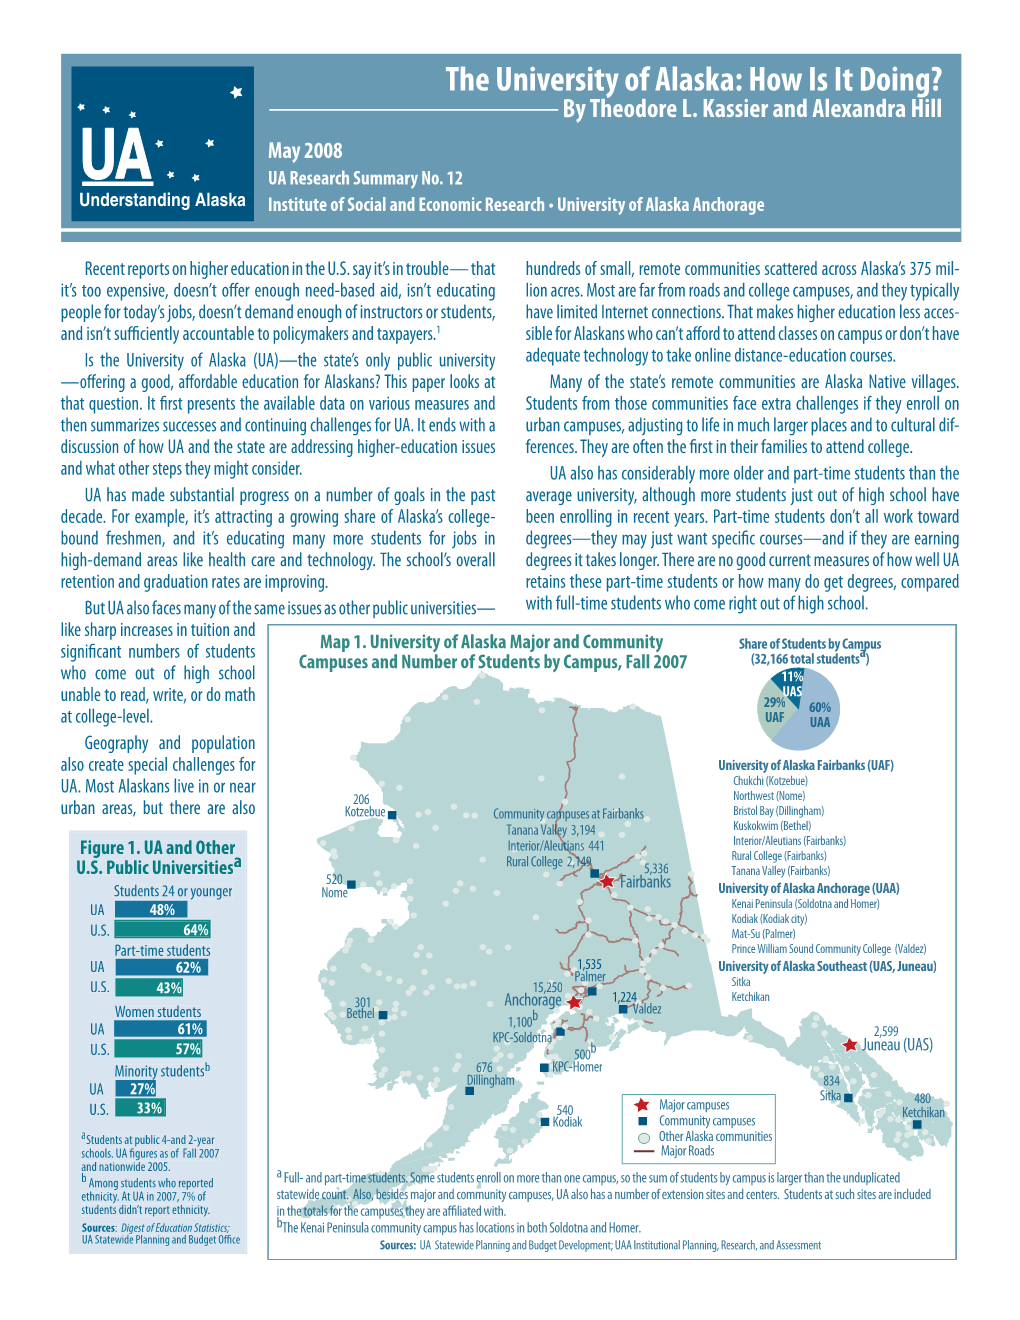 The University of Alaska: How Is It Doing? by Theodore L